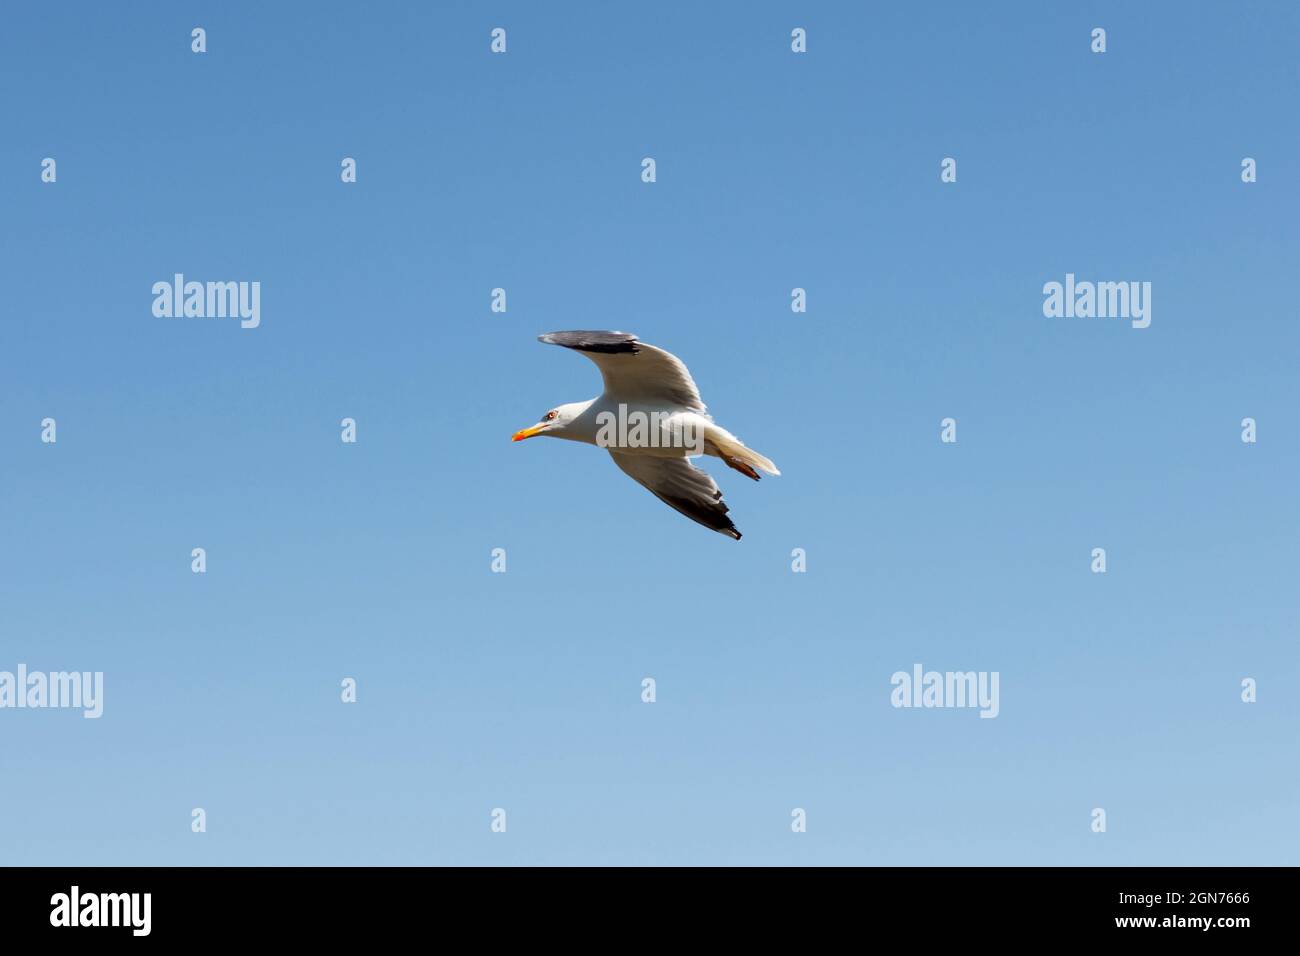 Flying Seagulld in the sky over sea Stock Photo